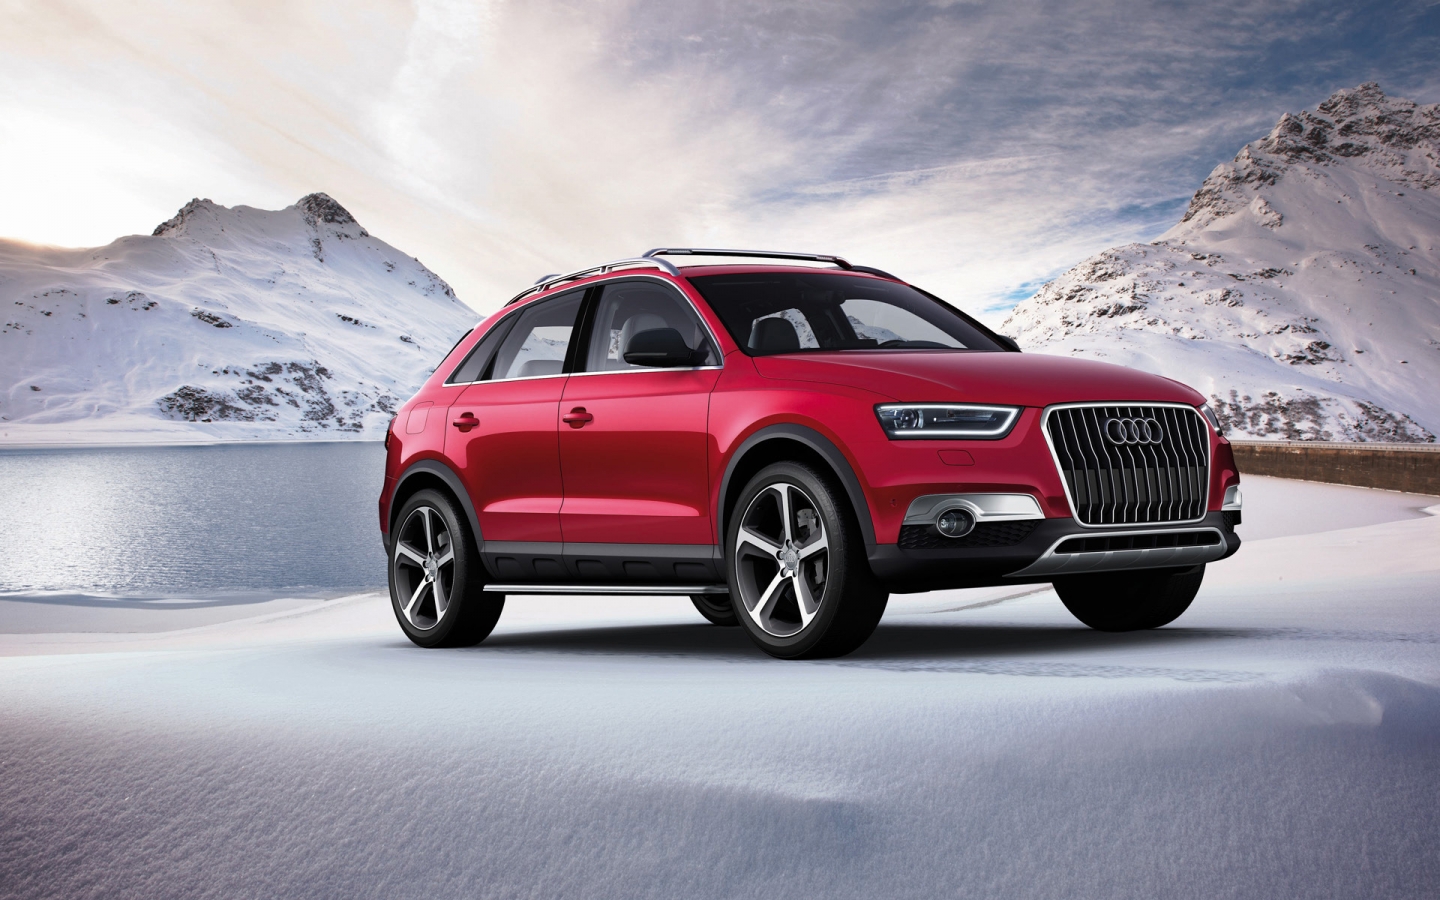 2012 Audi Q3 Vail for 1440 x 900 widescreen resolution